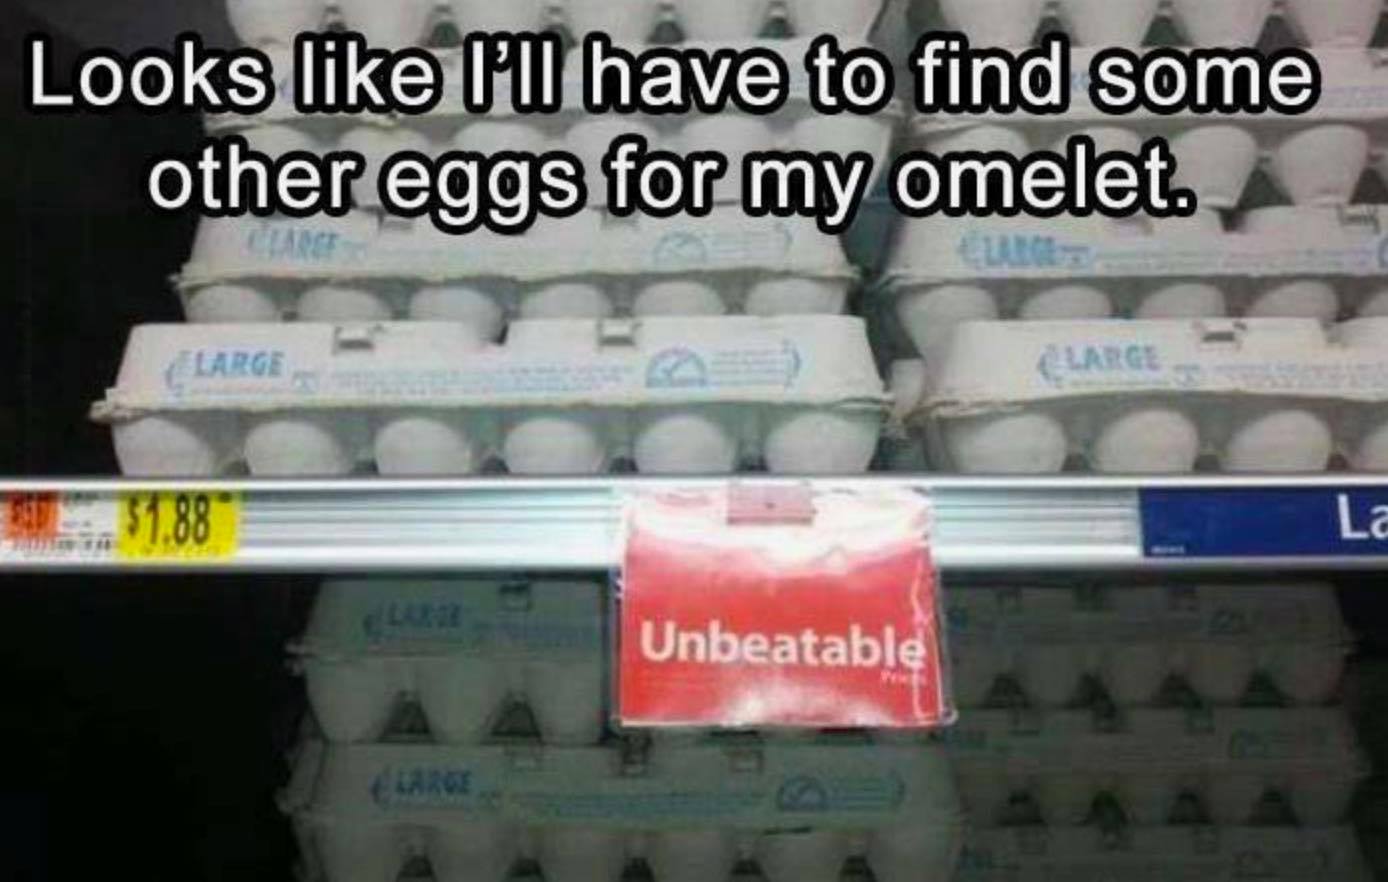 drug - Looks I'W have to find some other eggs for my omelet. Large Clarge 51.88 La Unbeatable